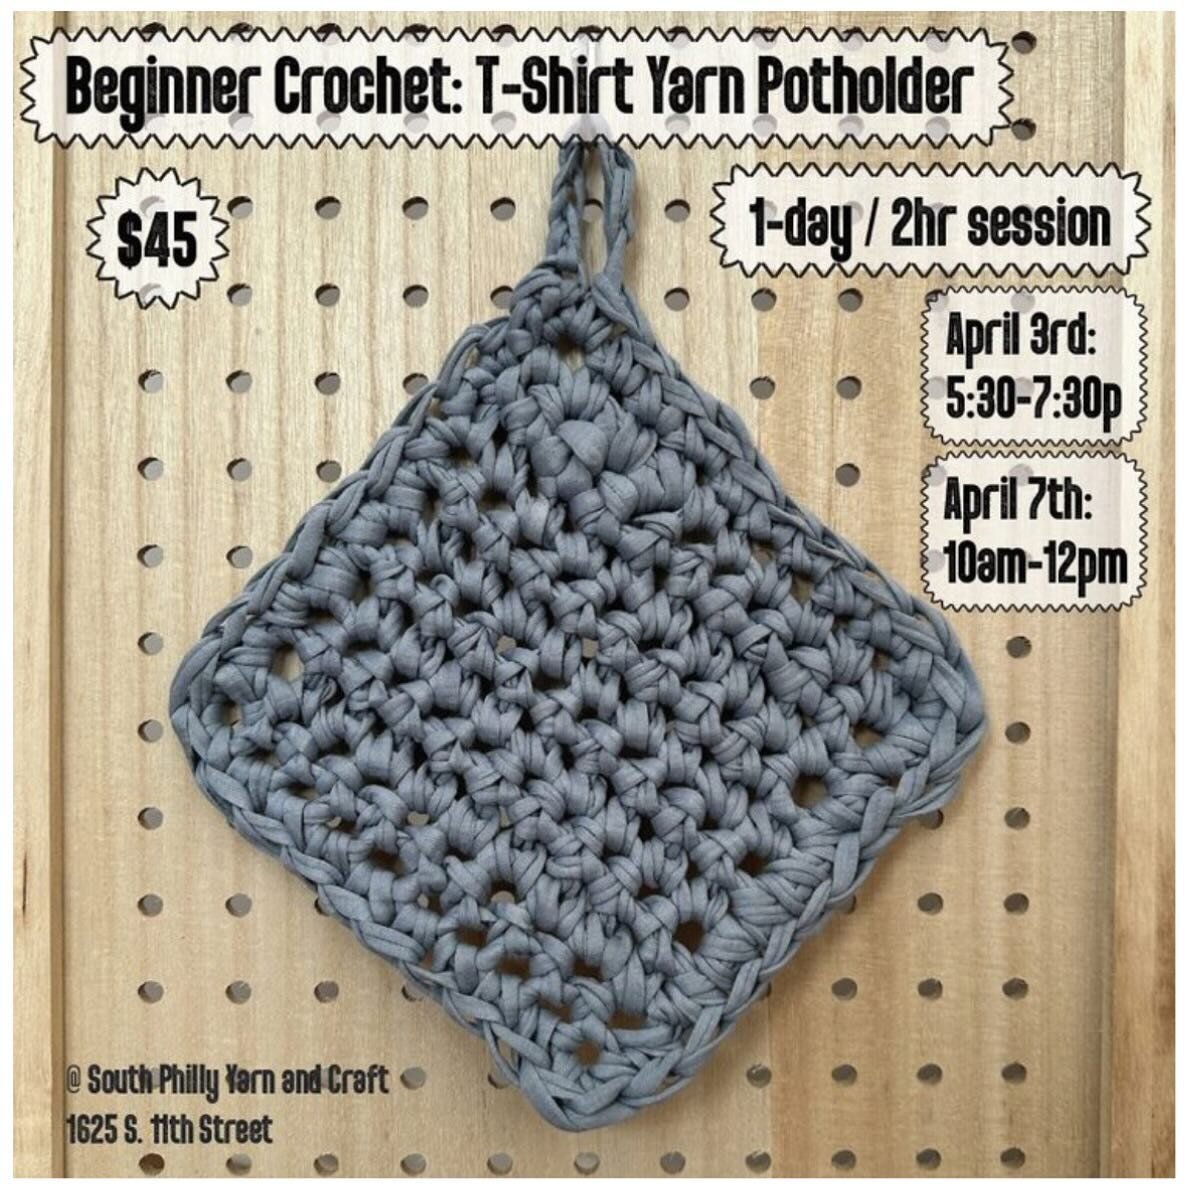 This Sunday&rsquo;s class is still available!

Using a crochet hook and up-cycled cotton t-shirt yarn, you&rsquo;ll make a chunky potholder in this class.
All supplies are provided!

#beginnercrochet #beginnercrochetclass 
#knitting #spinning #yarn #